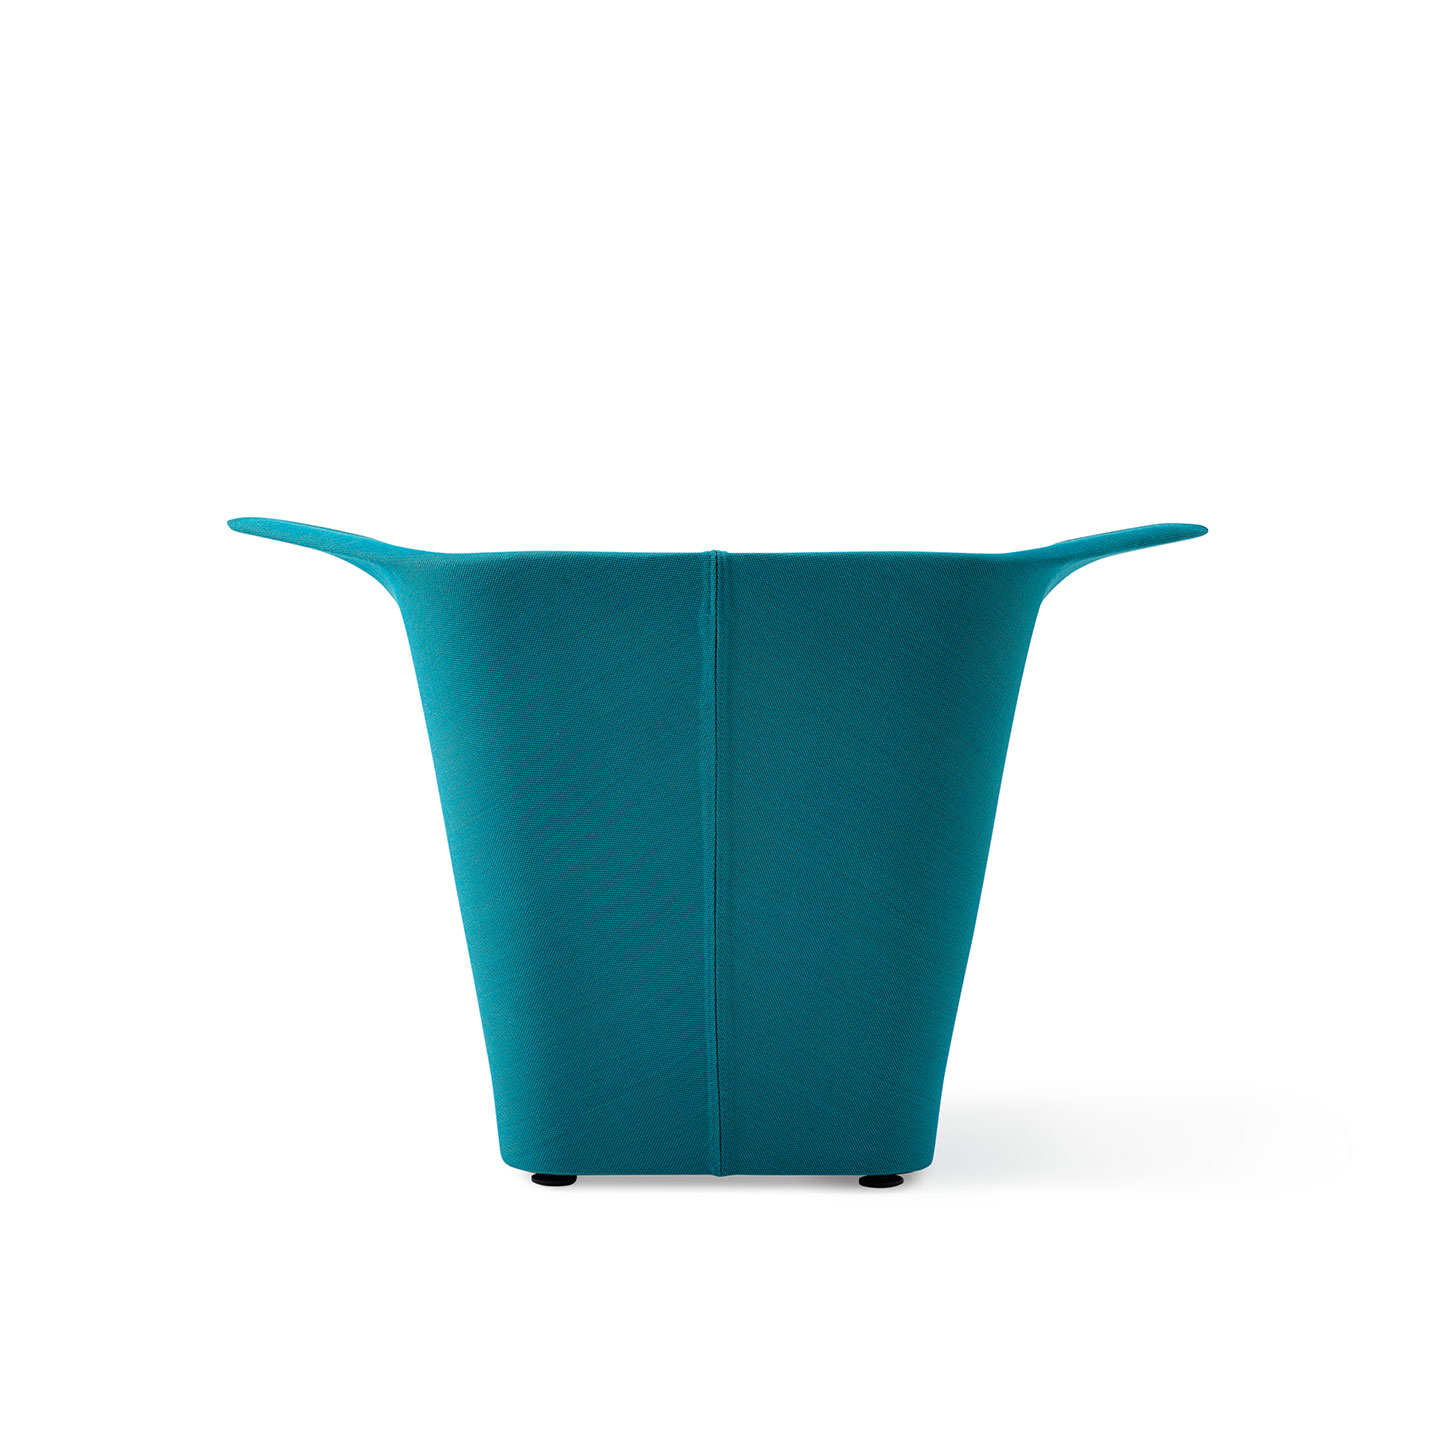 Haworth Garment lounge chair in teal color back view